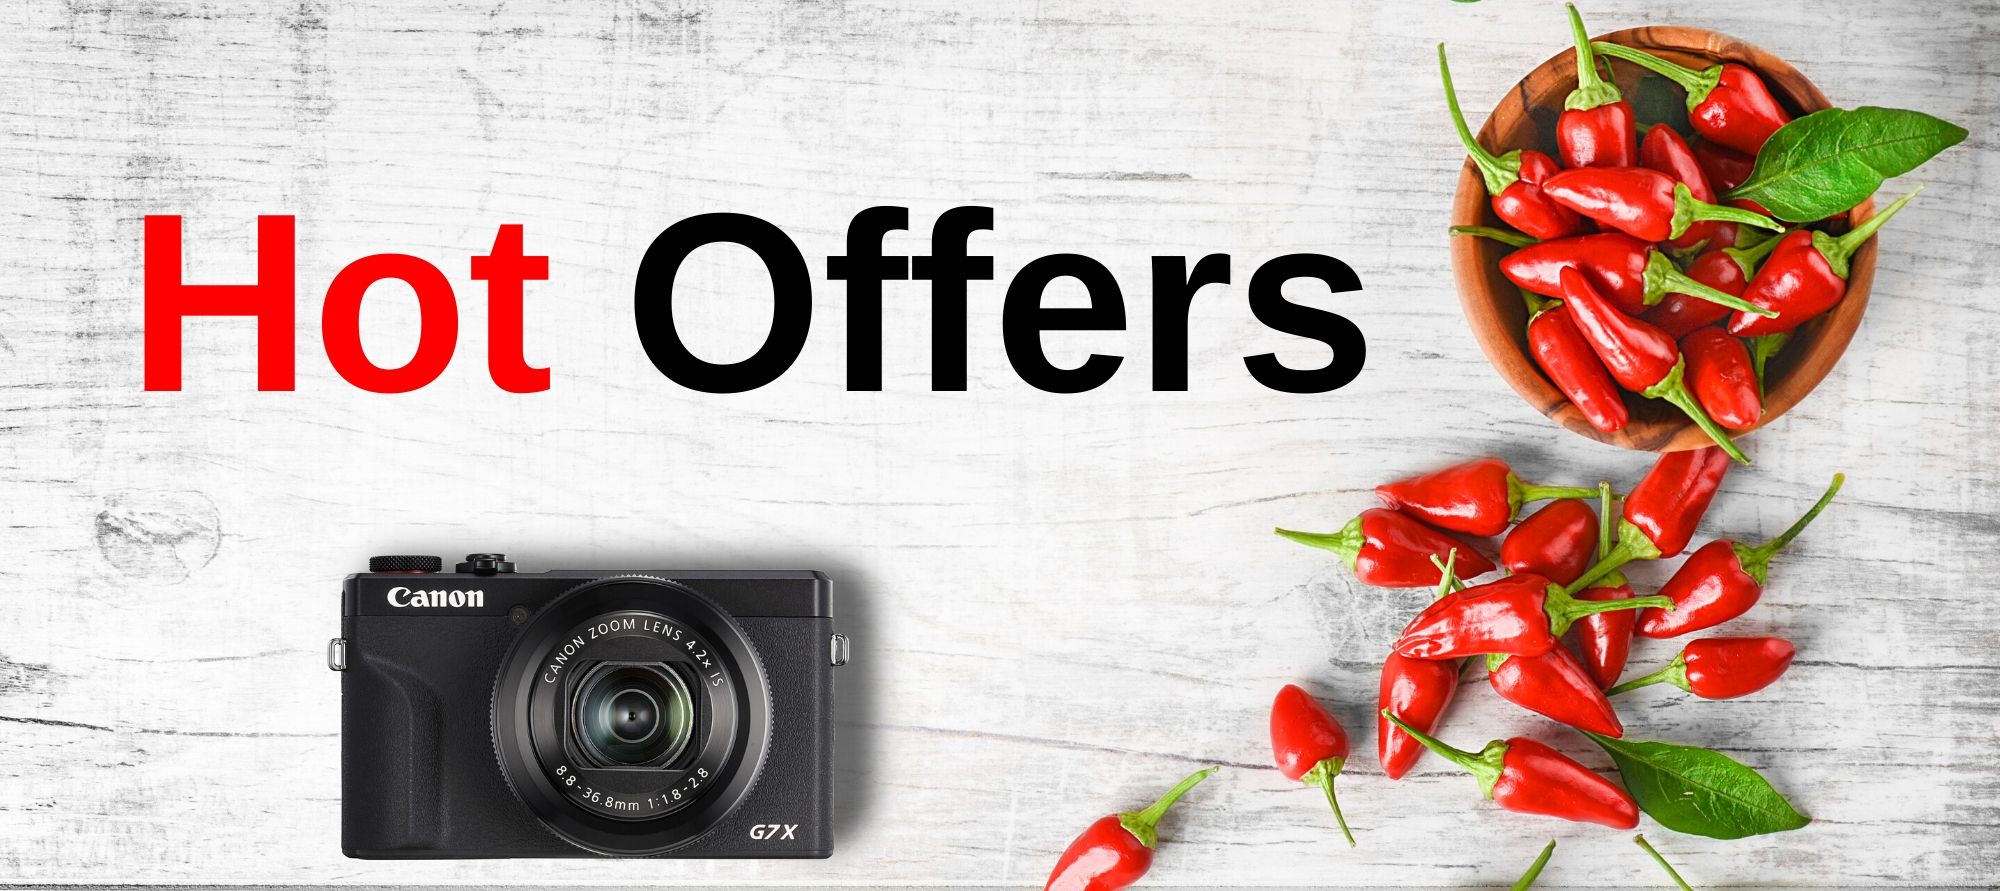 <h1 style="text-align: left;">Limited time Cameras, Camera Lenses and Accessories on Sale.<br>Camera deals are constantly updated so keep checking back.</h1>
<p>These are DSLR, Mirrorless, Camera Lenses and Digital Compact Cameras that have been handpicked as special deals.<br>We ship express all around Australia from our digital camera warehouse overnight throughout Australia including Adelaide, Melbourne and Sydney and Perth.</p>